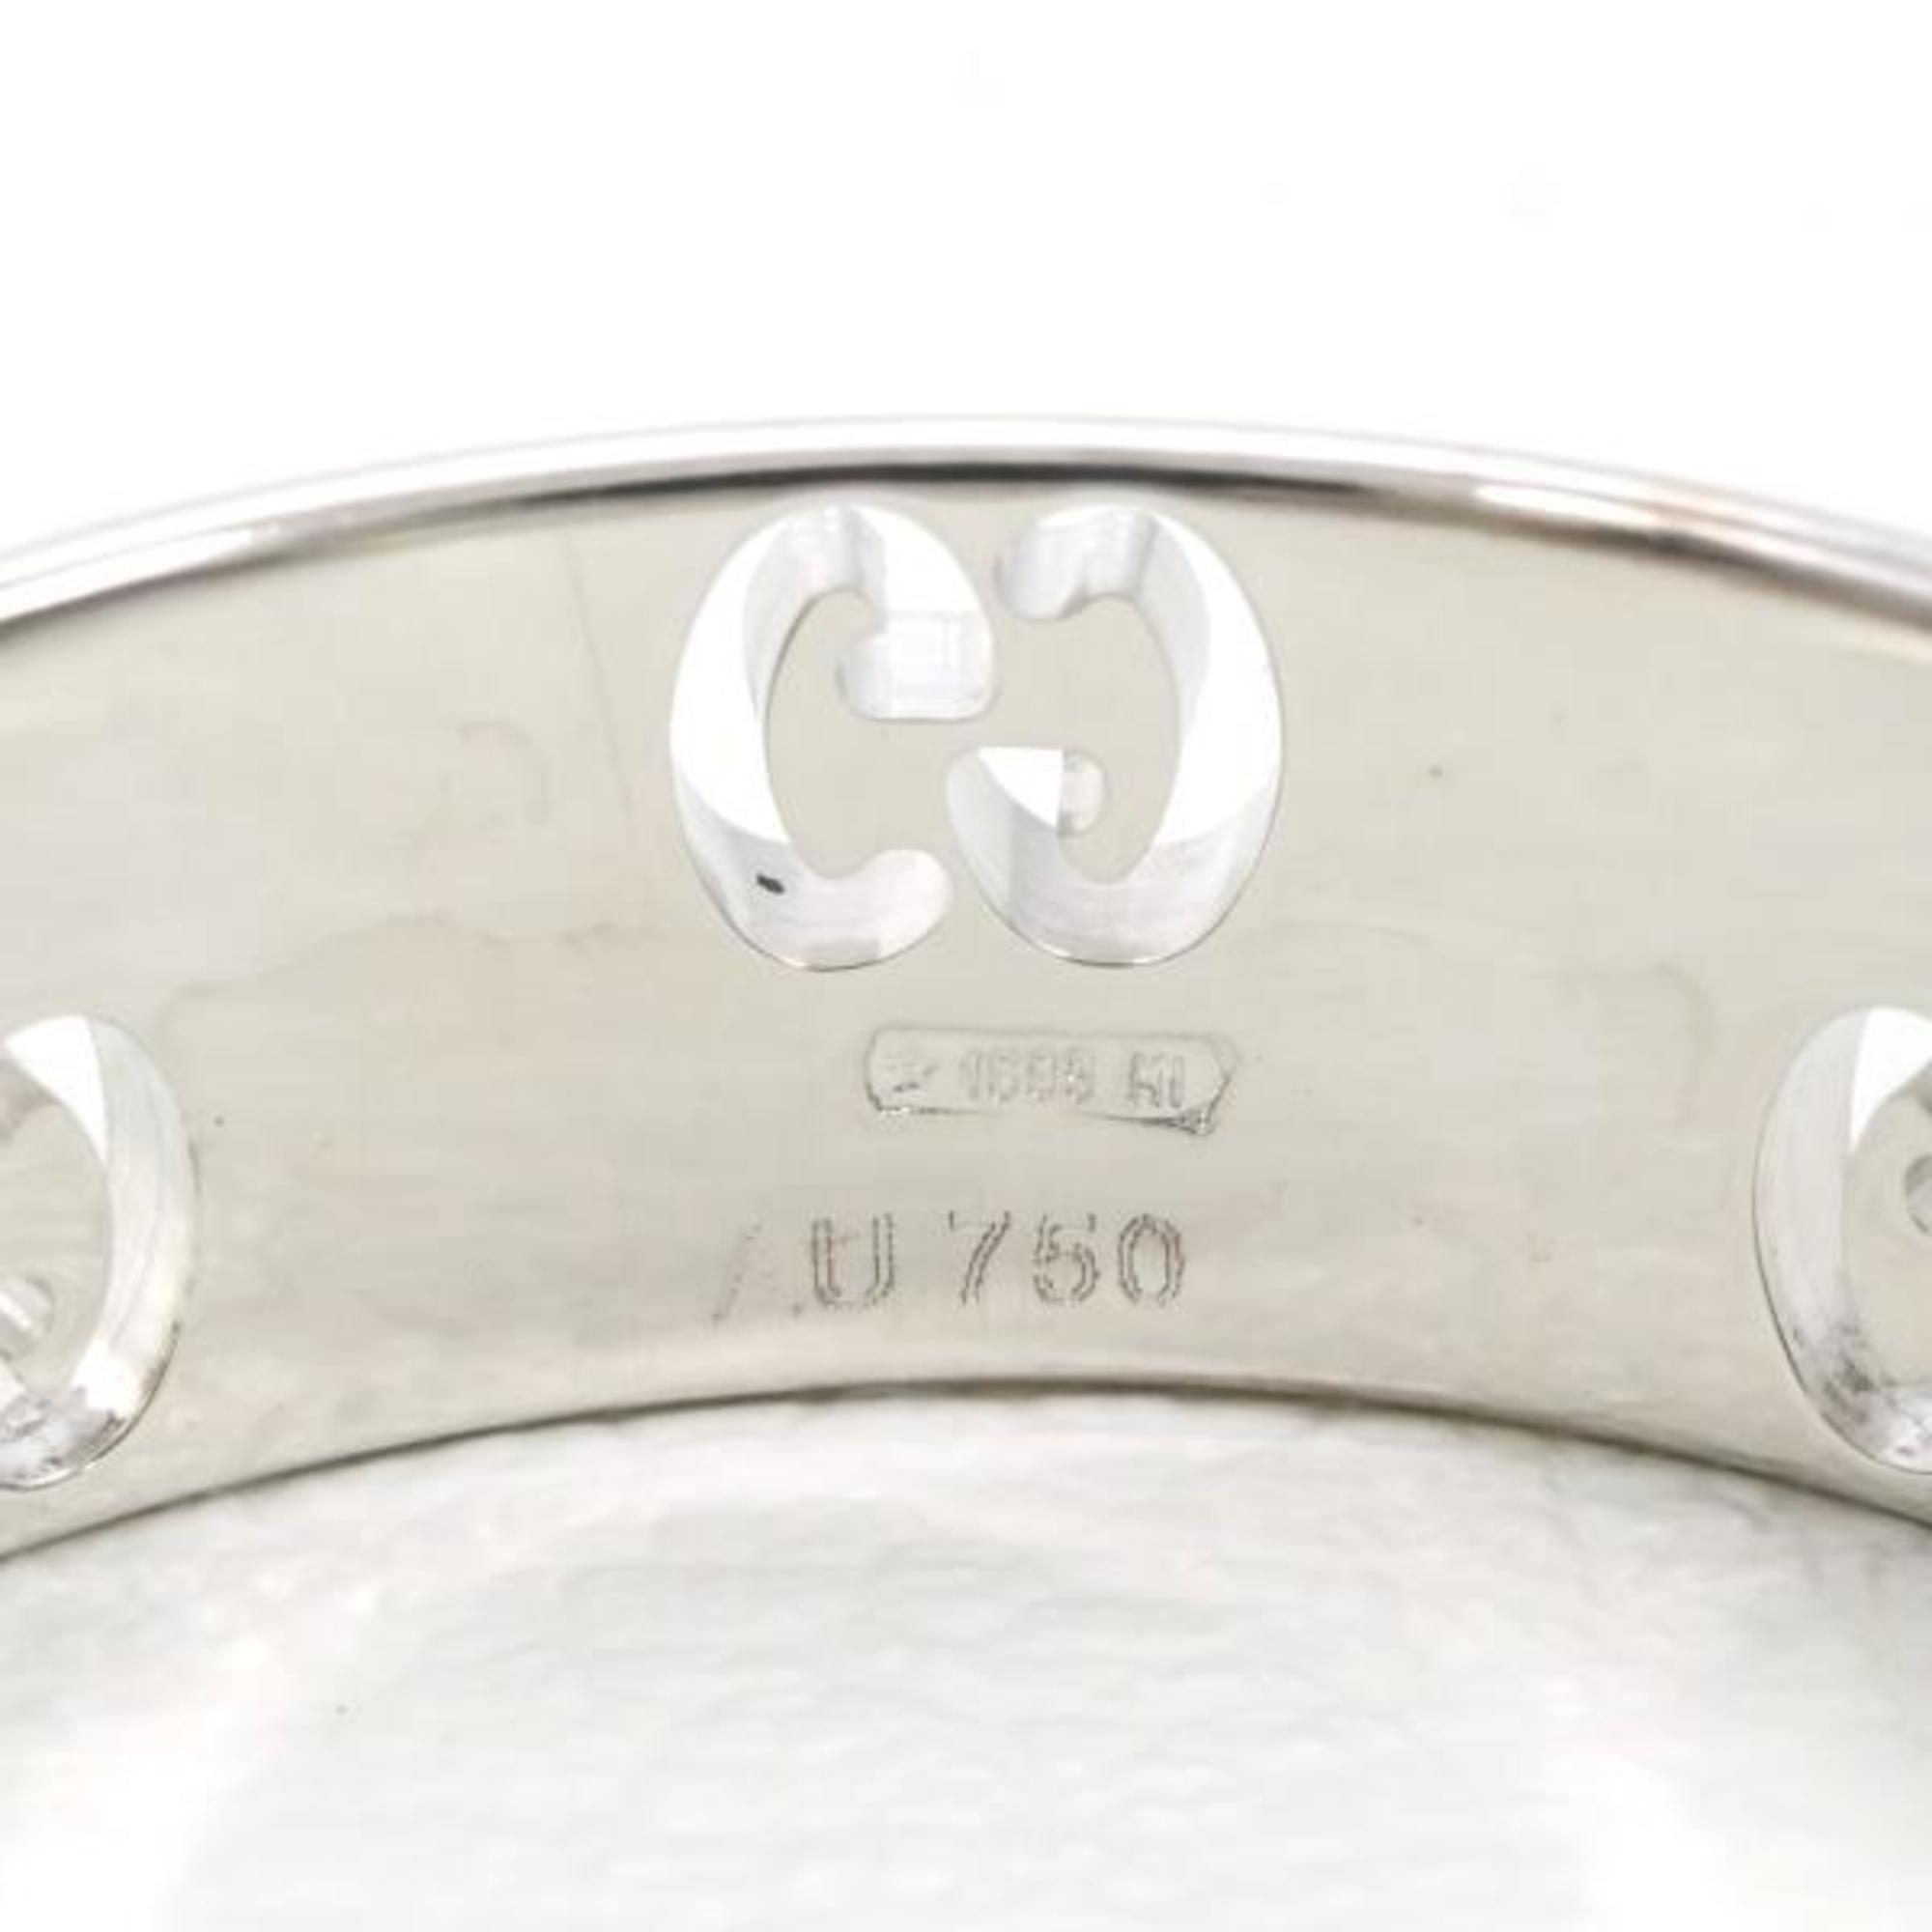 Gucci Icon K18WG Ring Total Weight Approx. 4.8g Jewelry